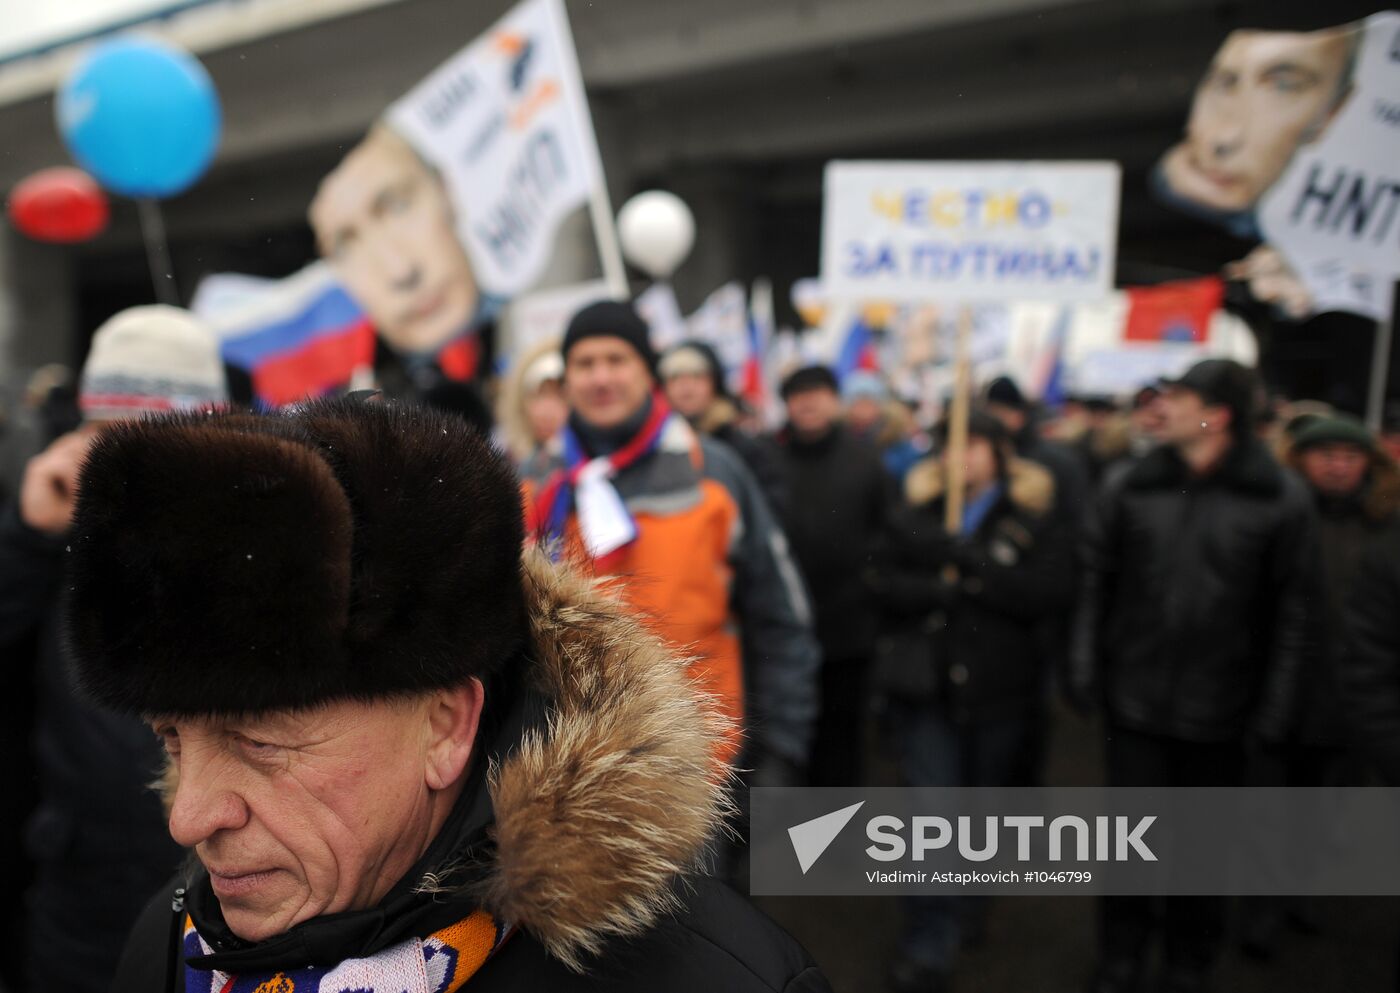 "Let's Defend Our Country!" march and rally in support of Putin